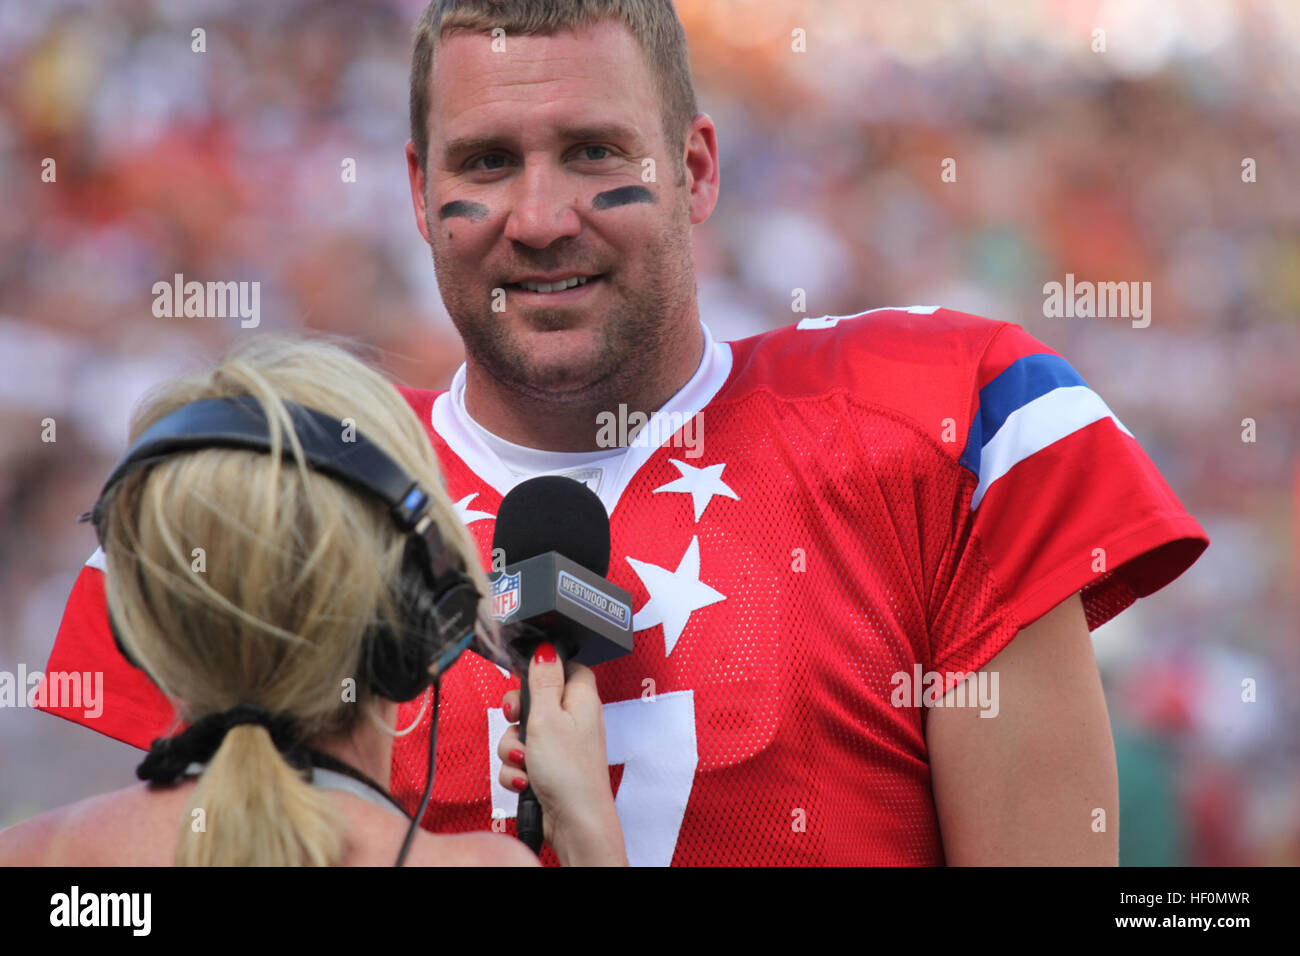 Pittsburgh Steelers quarterback Ben Roethlisberger is interviewed at the Aloha Stadium during the National Football League's 2012 Pro Bowl game in Honolulu, Hawaii, Jan. 29, 2012. Pro Bowl 2012 120129-M-DX861-089 Stock Photo